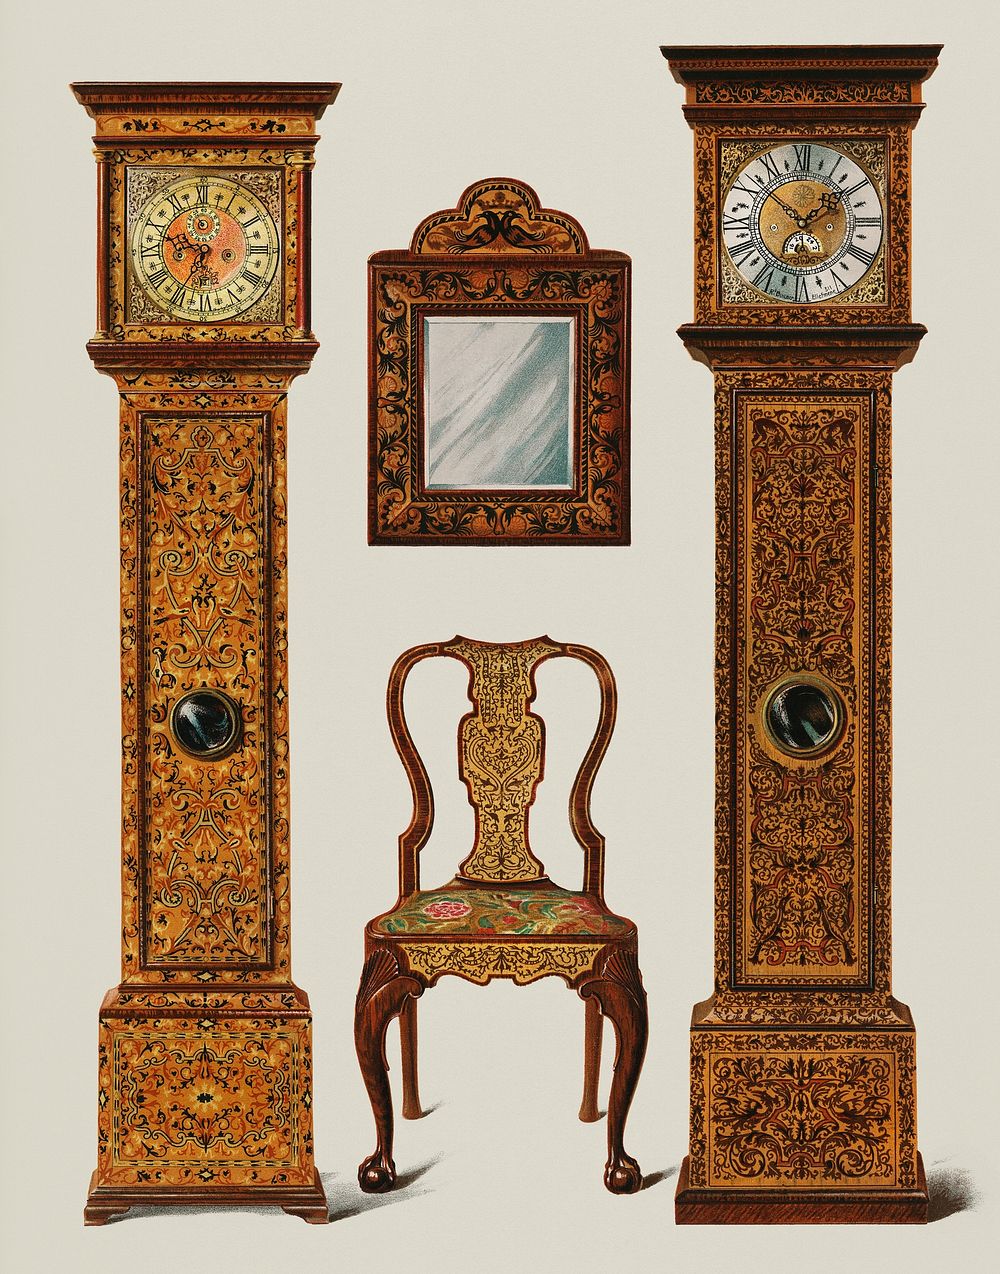 An illustration of Edwardian furniture (1905) drawn by Shirley Slocombe, a beautifully detailed design of a wooden chair…